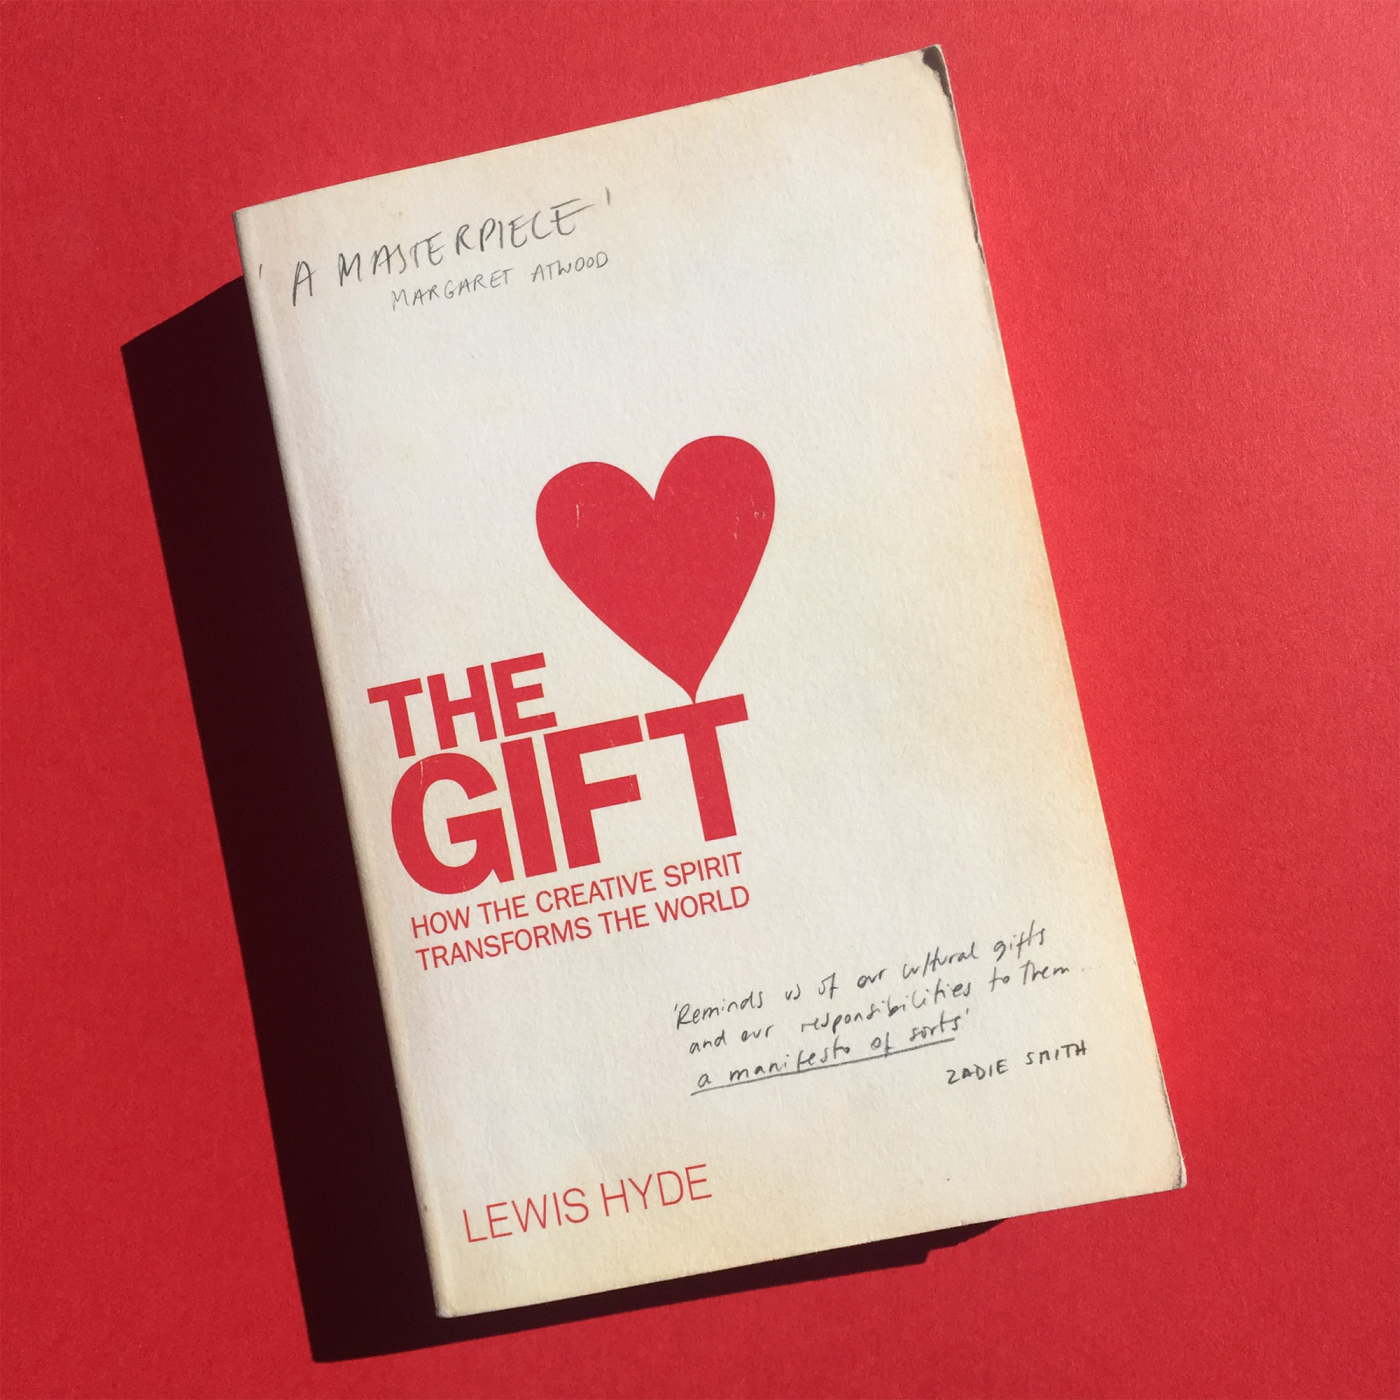 A book entitled "The Gift: How the creative spirit transforms the world."